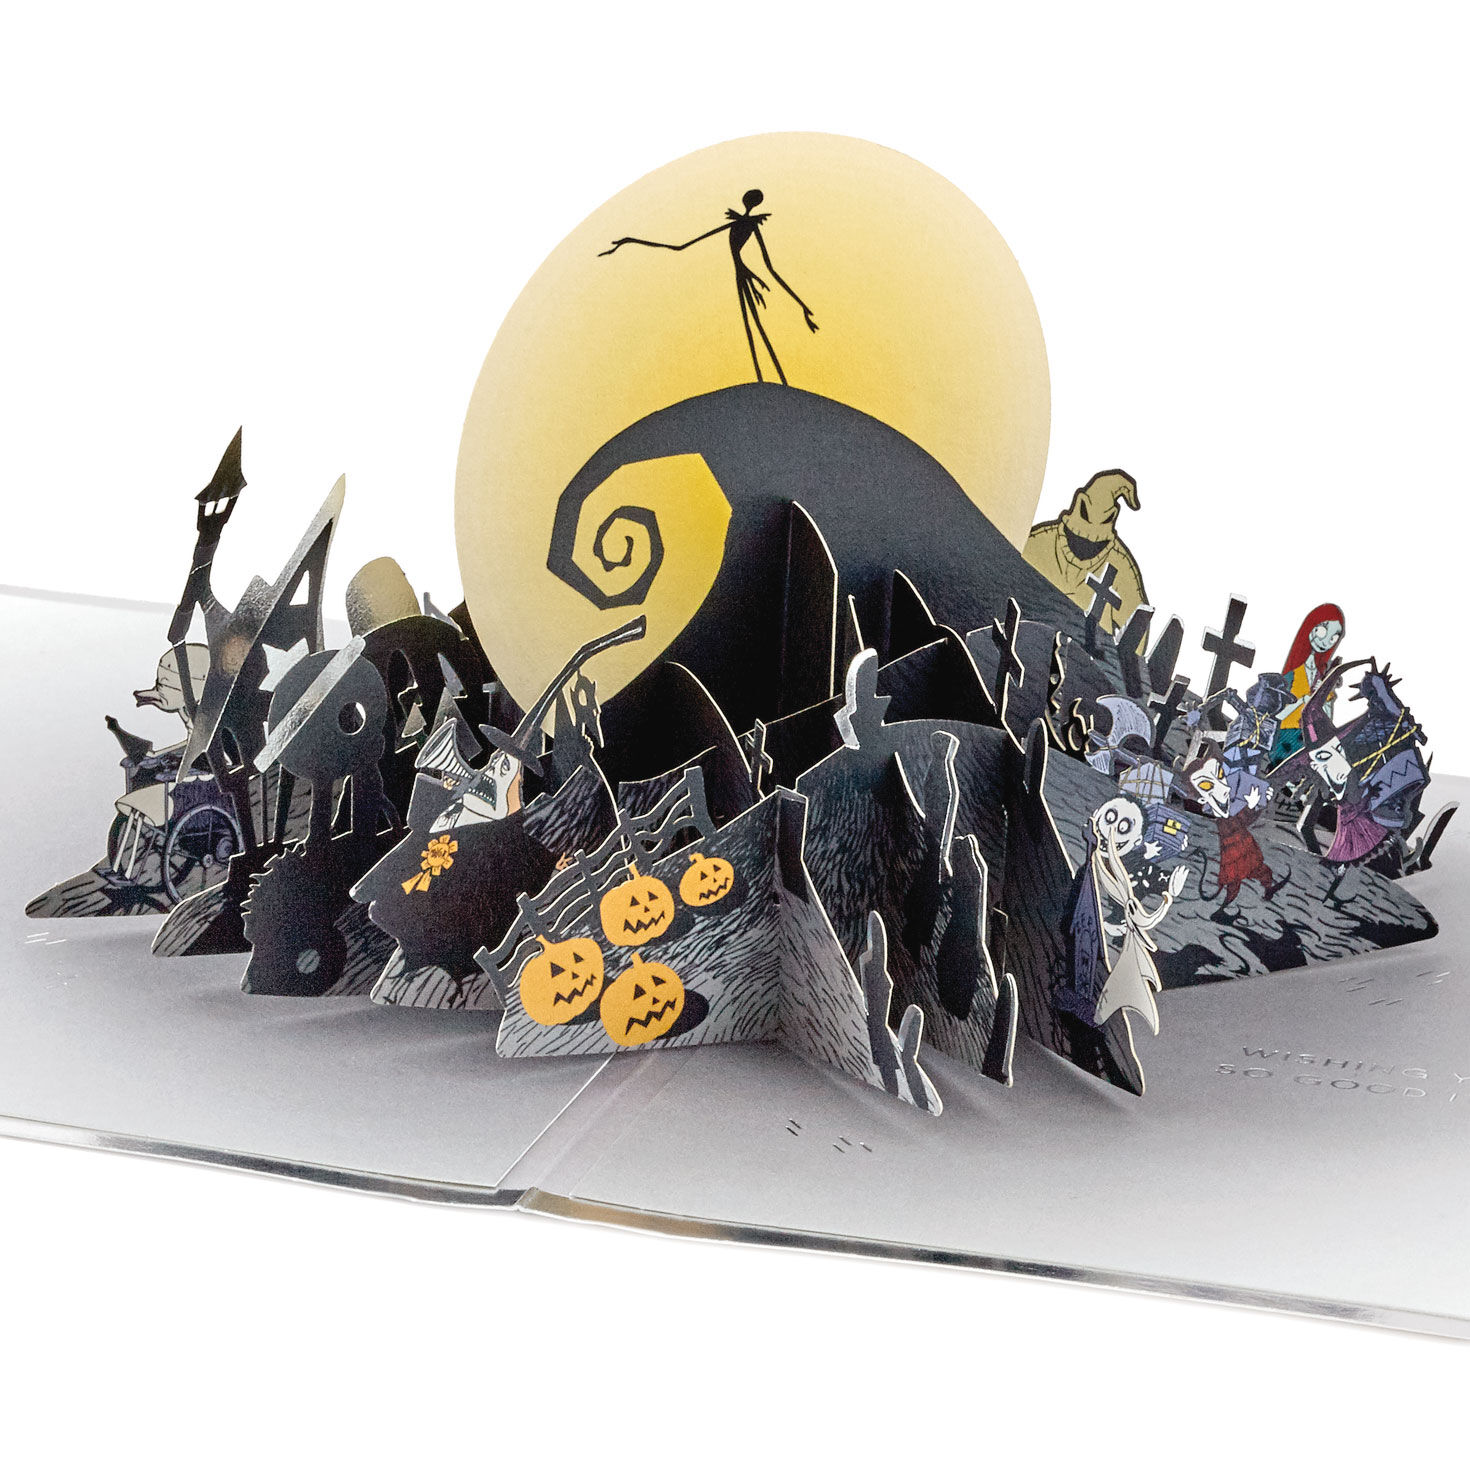 Disney Tim Burton's The Nightmare Before Christmas Happy Nightmares 3D Pop-Up Card for only USD 14.99 | Hallmark